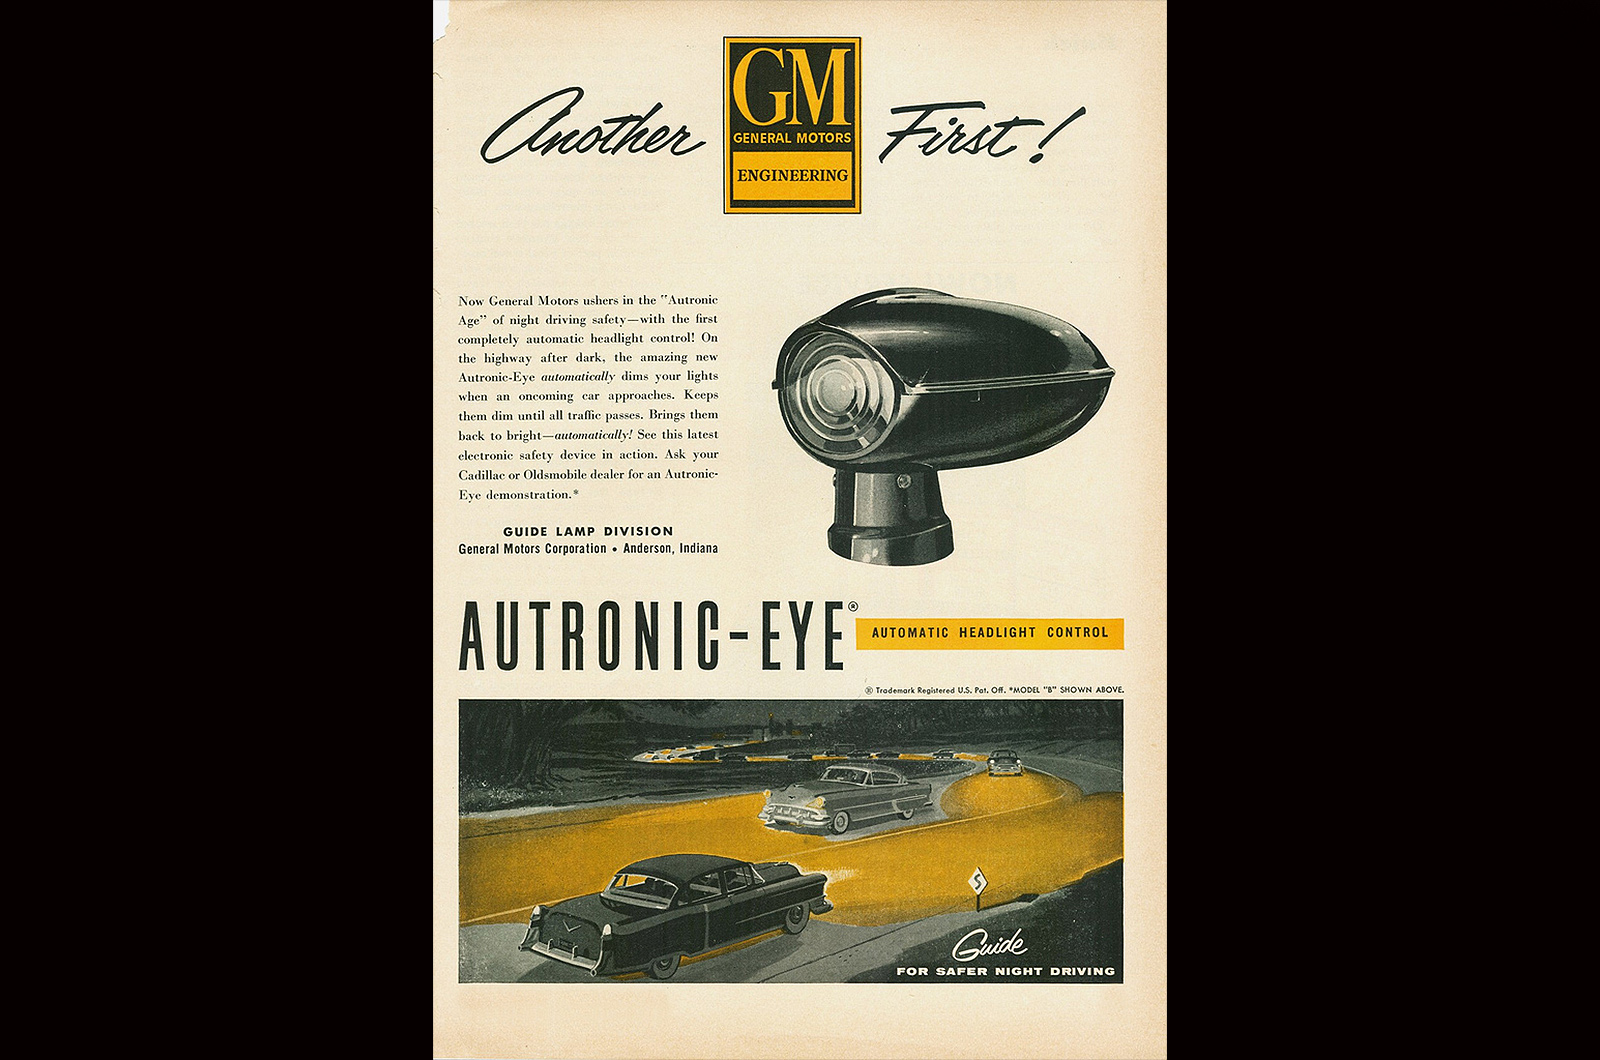 <p>This technology is fairly rare today, but <strong>Oldsmobile </strong>introduced headlights that dim themselves as far back as 1952. It was called <strong>Autronic Eye</strong>, and consisted of a light-detecting switch installed in a housing mounted on the driver’s side of the dash. It automatically dimmed the headlights when it sensed light from oncoming cars; the option cost around <strong>$500 </strong>in today's money.</p><p>However many people complained the system was unreliable and too sensitive to other light sources like billboards. GM fine-tuned it and offered it on more cars, including several Cadillacs and Buicks. Today, much more sophisticated systems are reasonably common; the best of them adjust headlights to avoid blinding oncoming cars while at the same time optimising illumination as far as possible.</p><p><strong>GROUNDBREAKER SCORE: 4 </strong>– useful, but even today’s systems don’t work 100% reliably.</p>